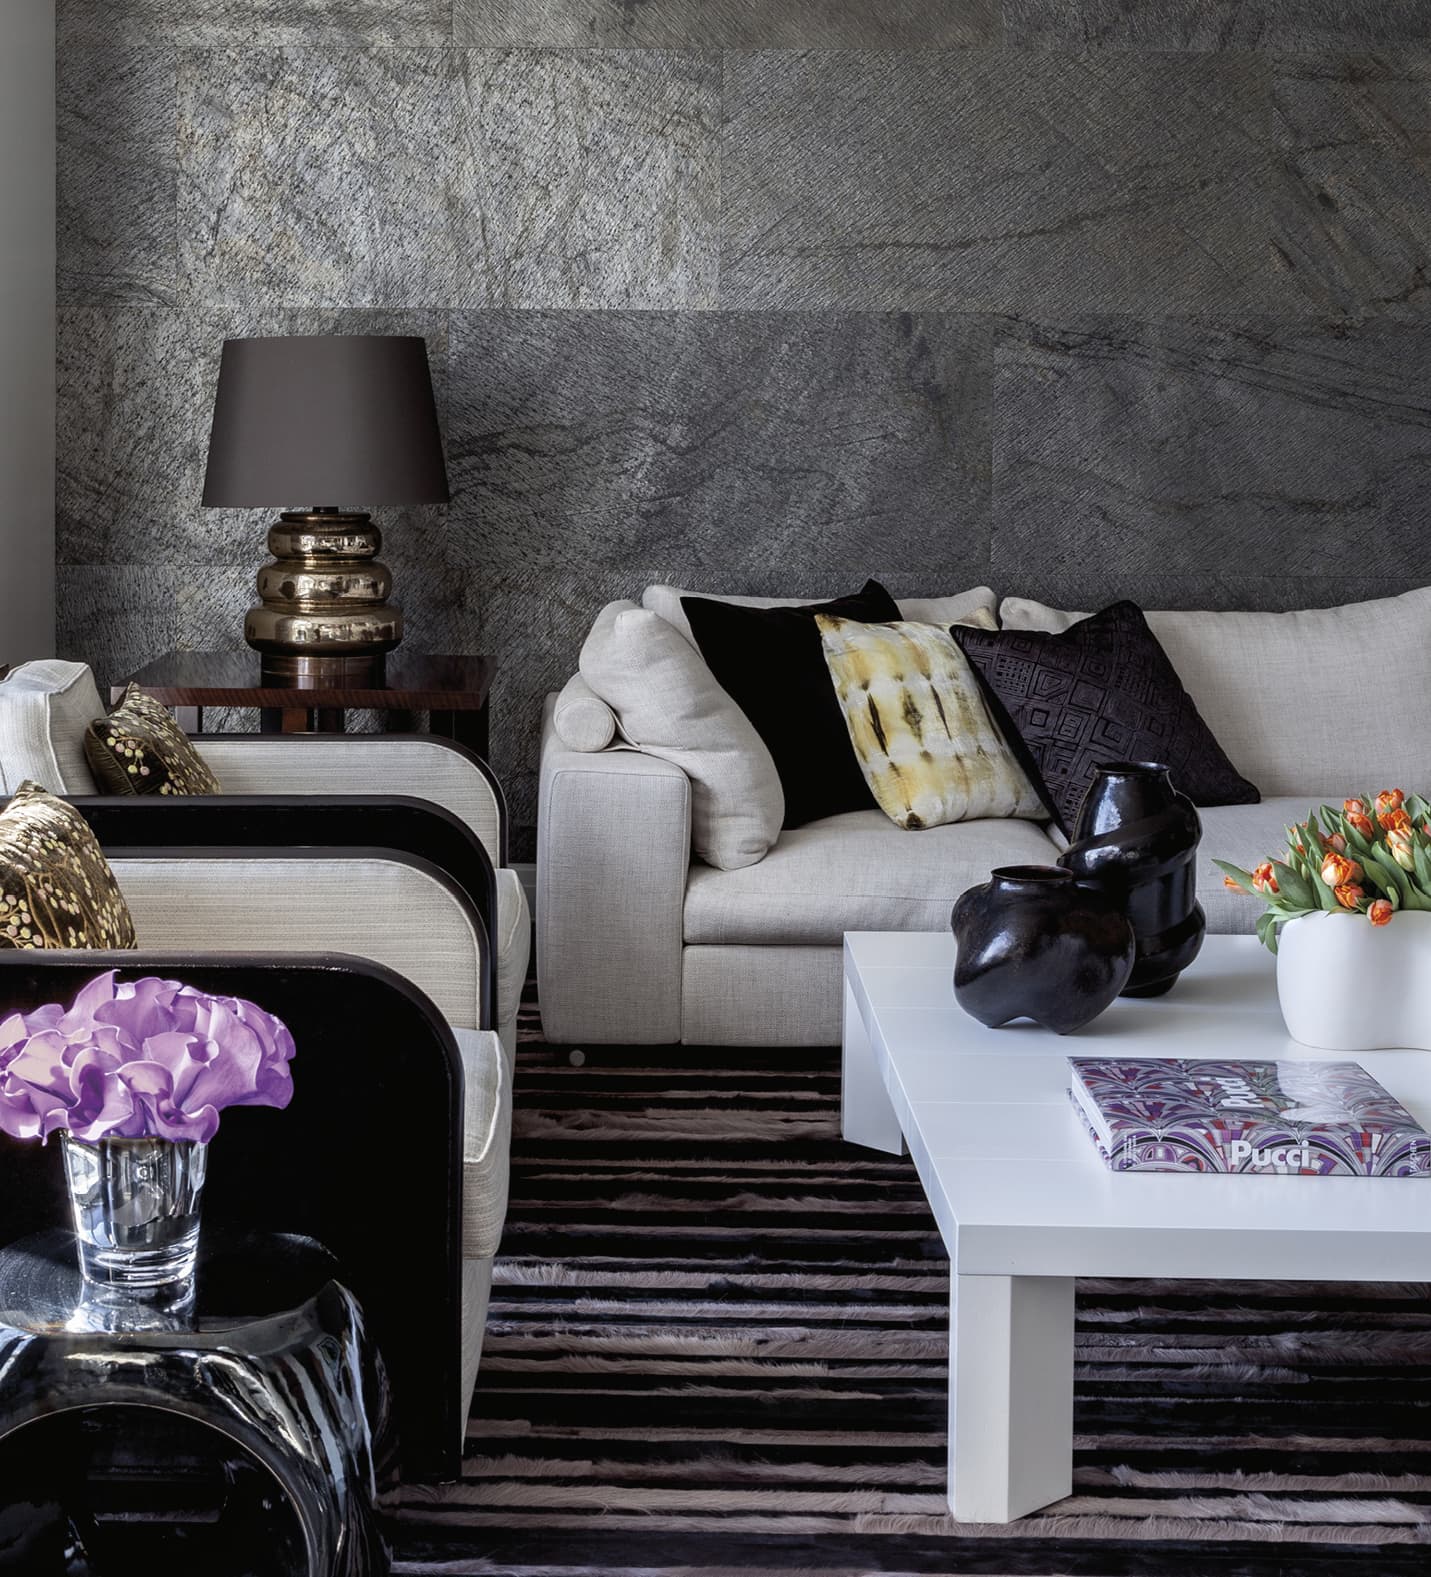 Sitting area with grey textured walls and white coffee table